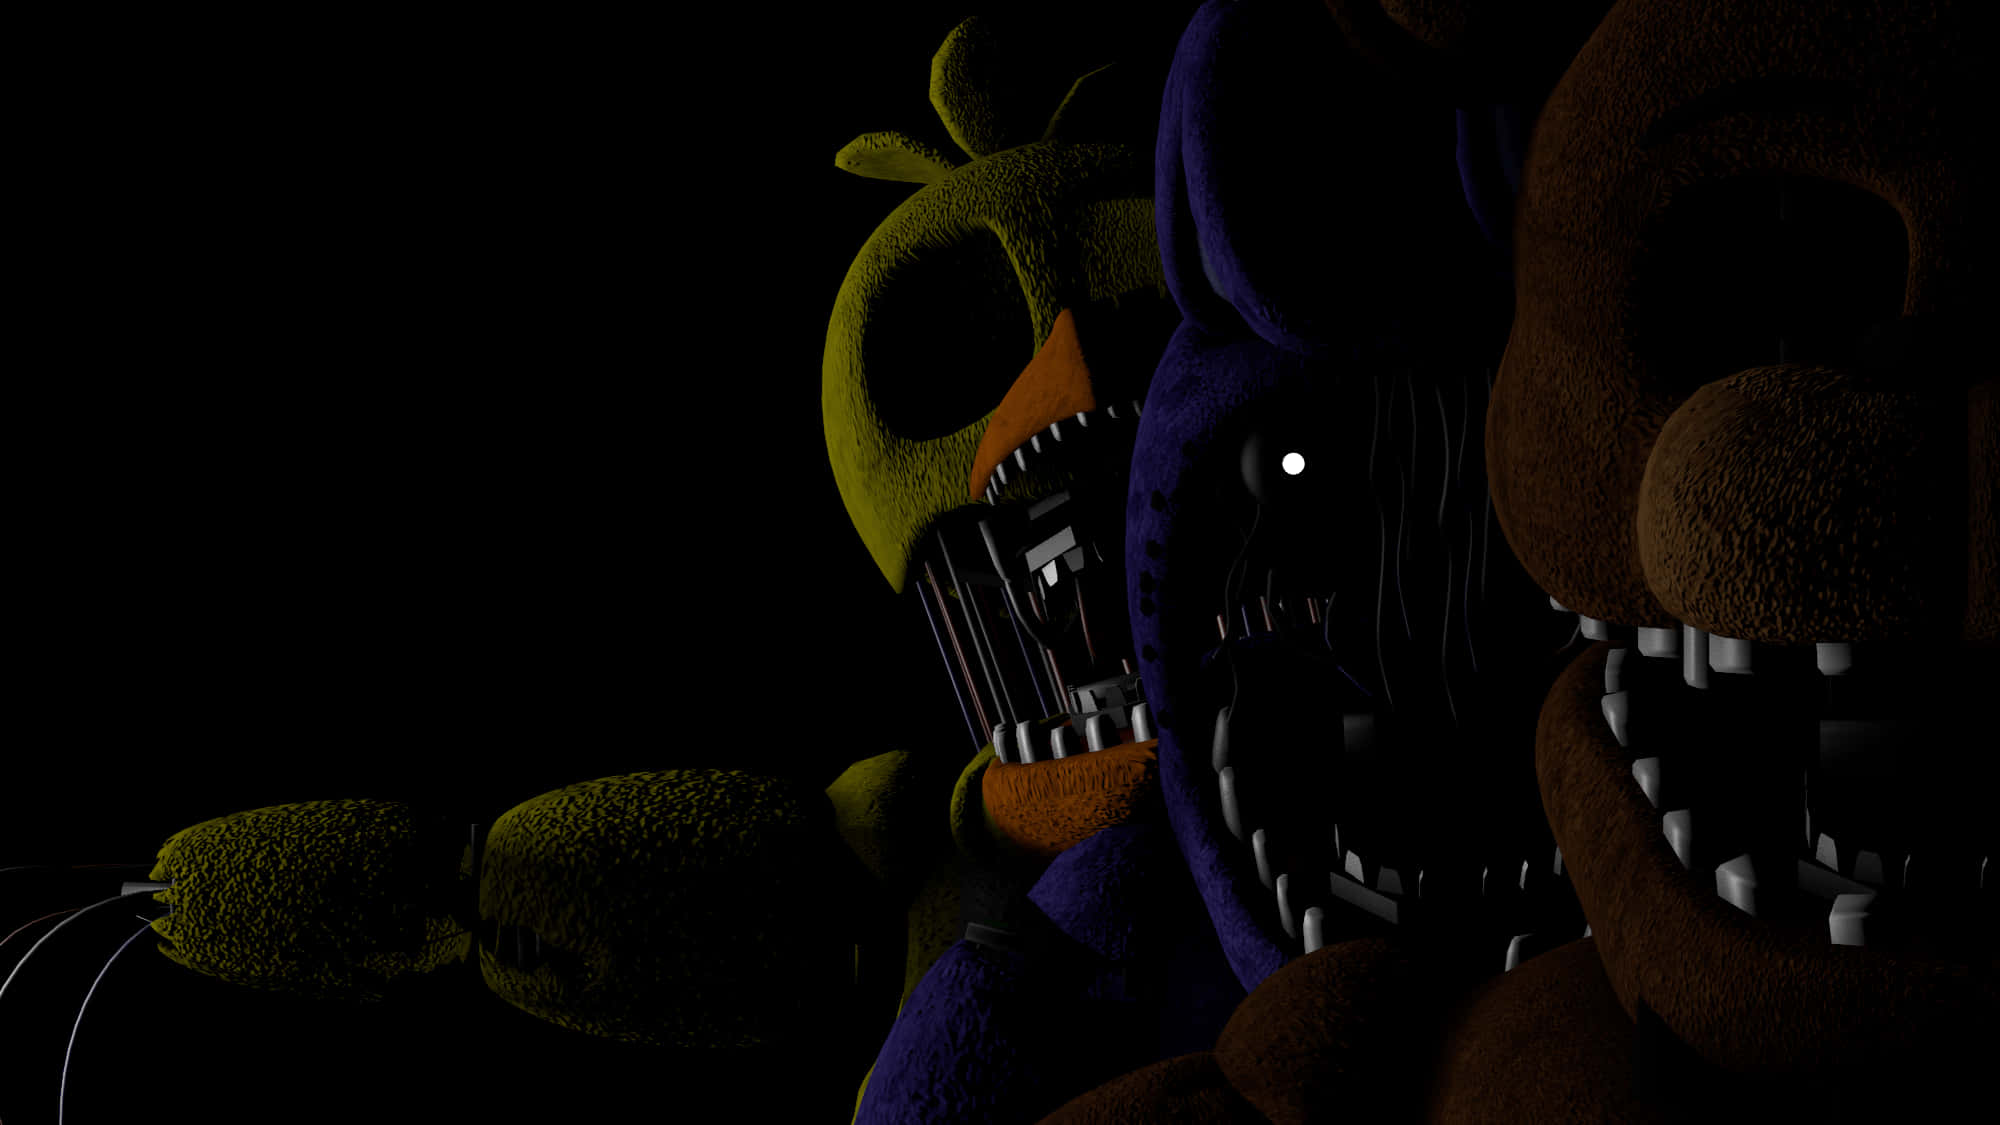 "Welcome to the spooky world of Five Nights at Freddy's!"